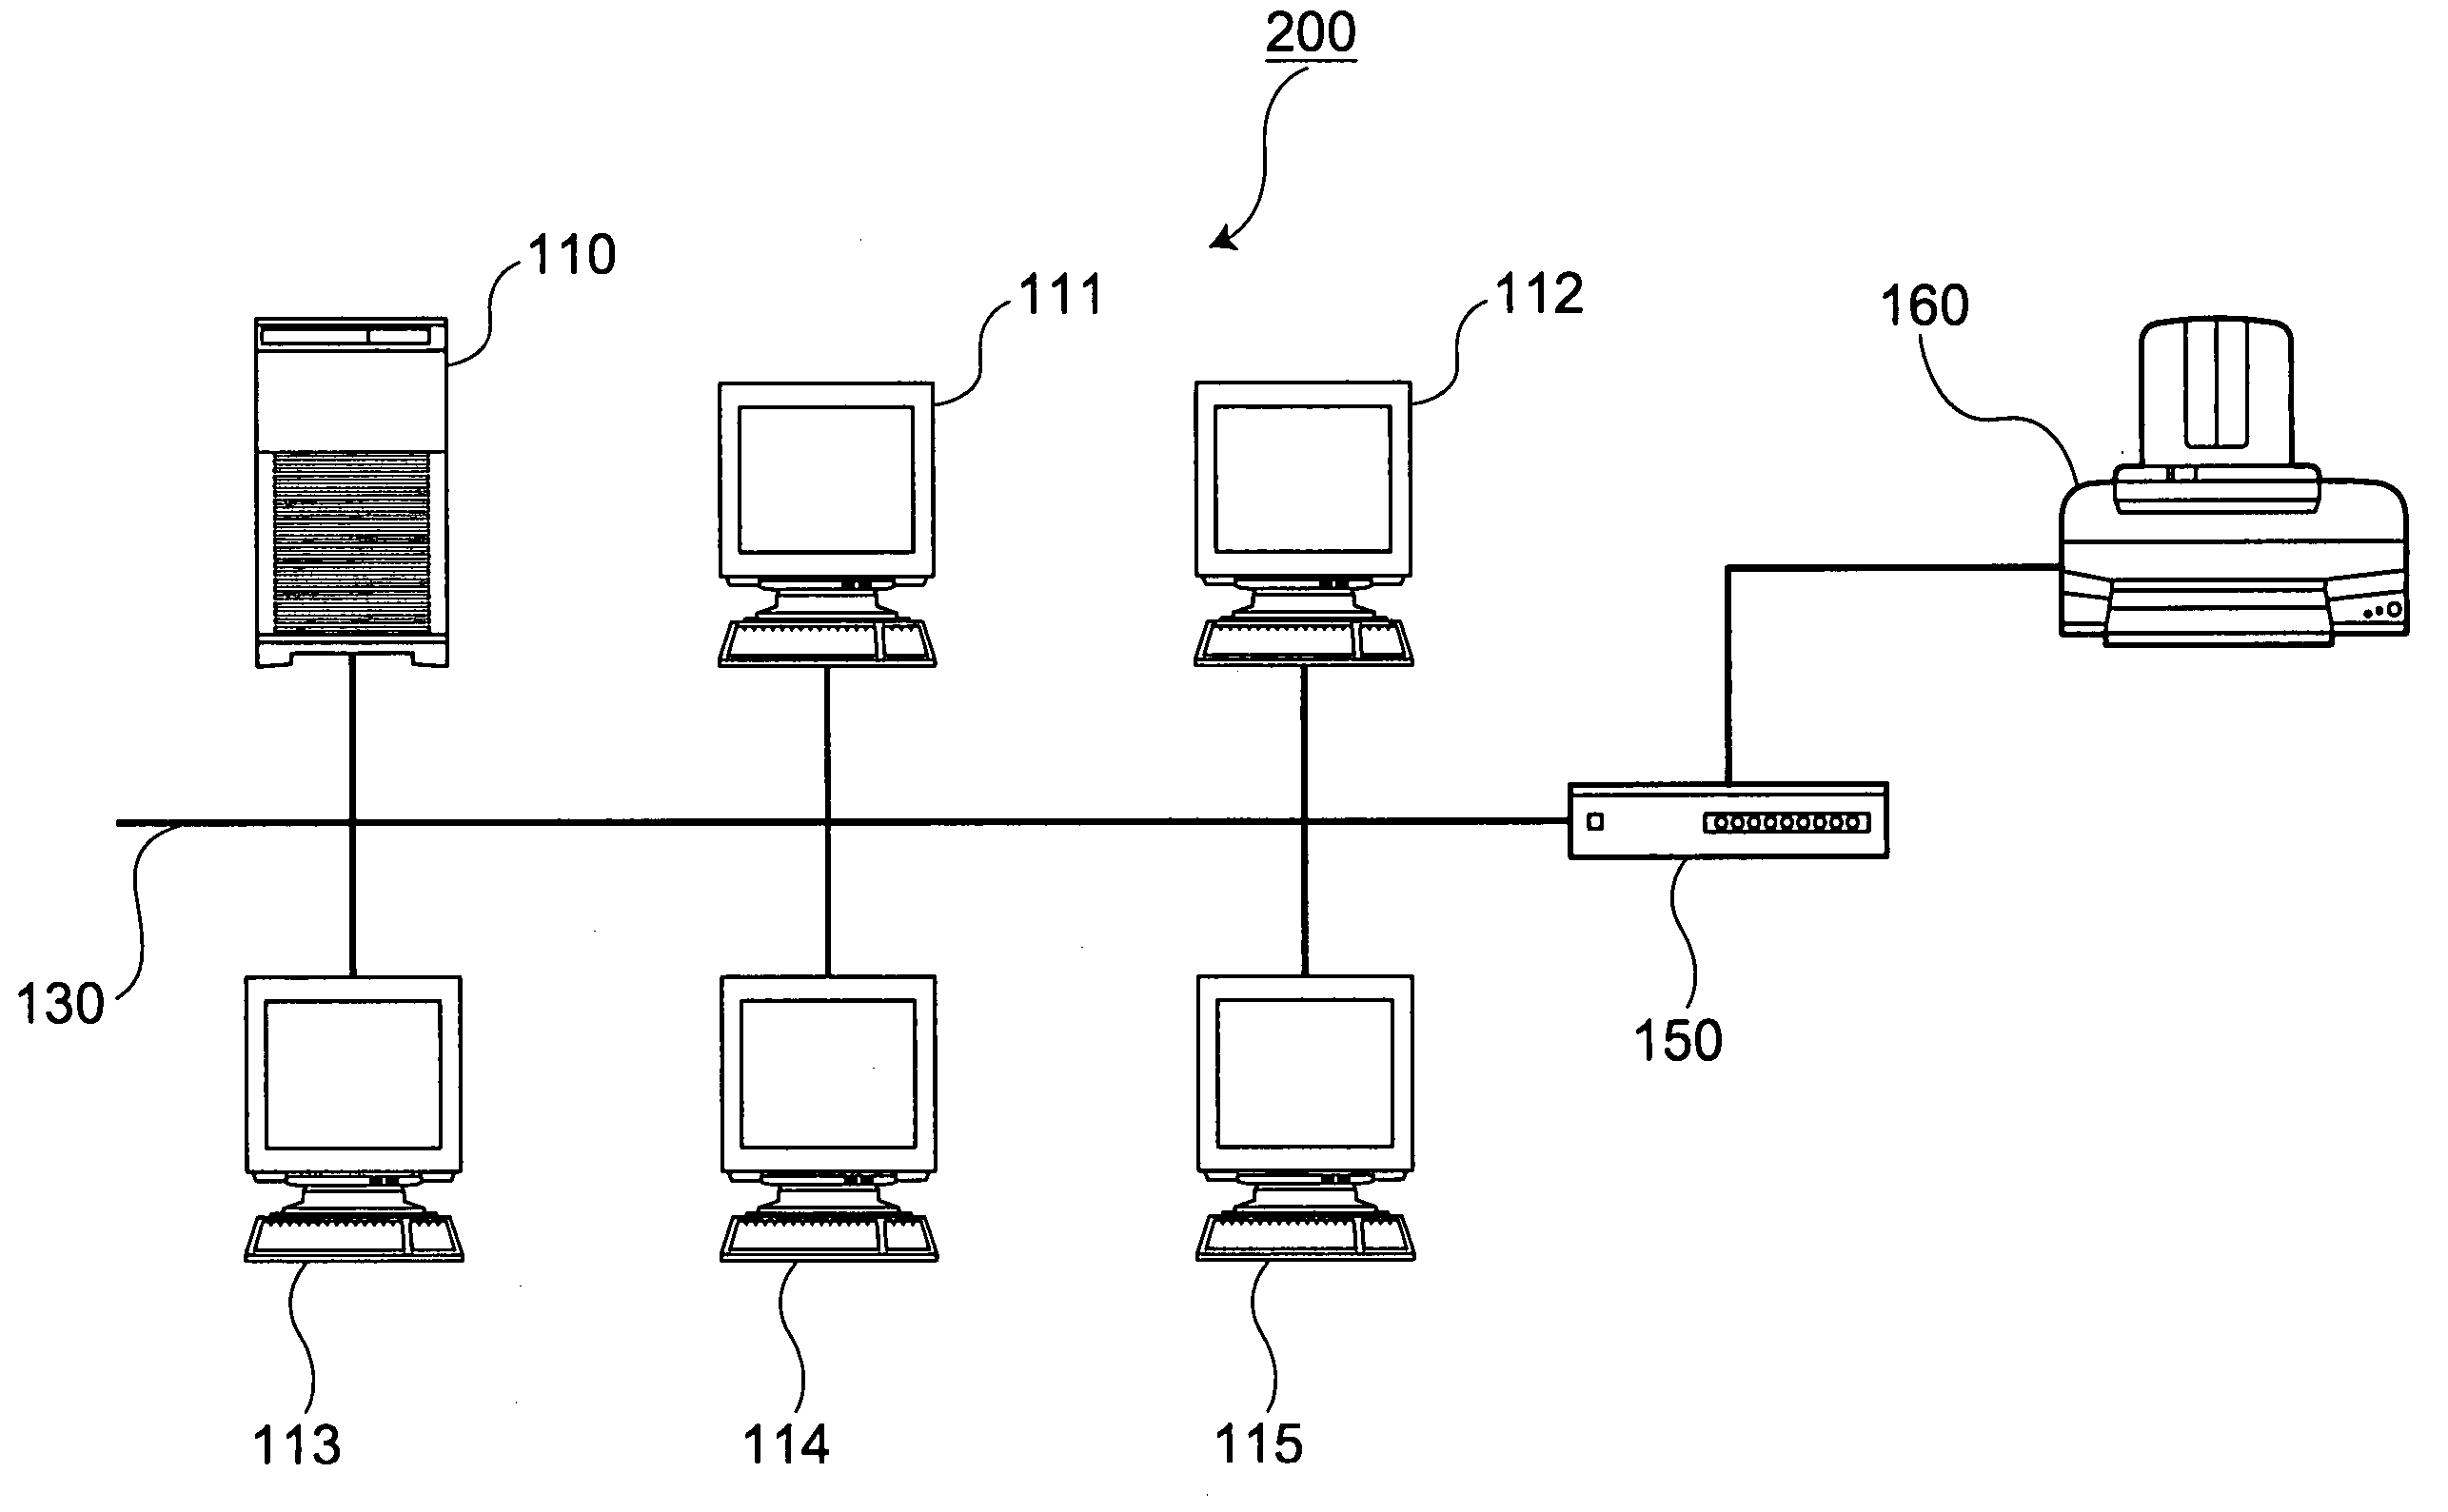 Printer with automatic acquisition and printing of network address